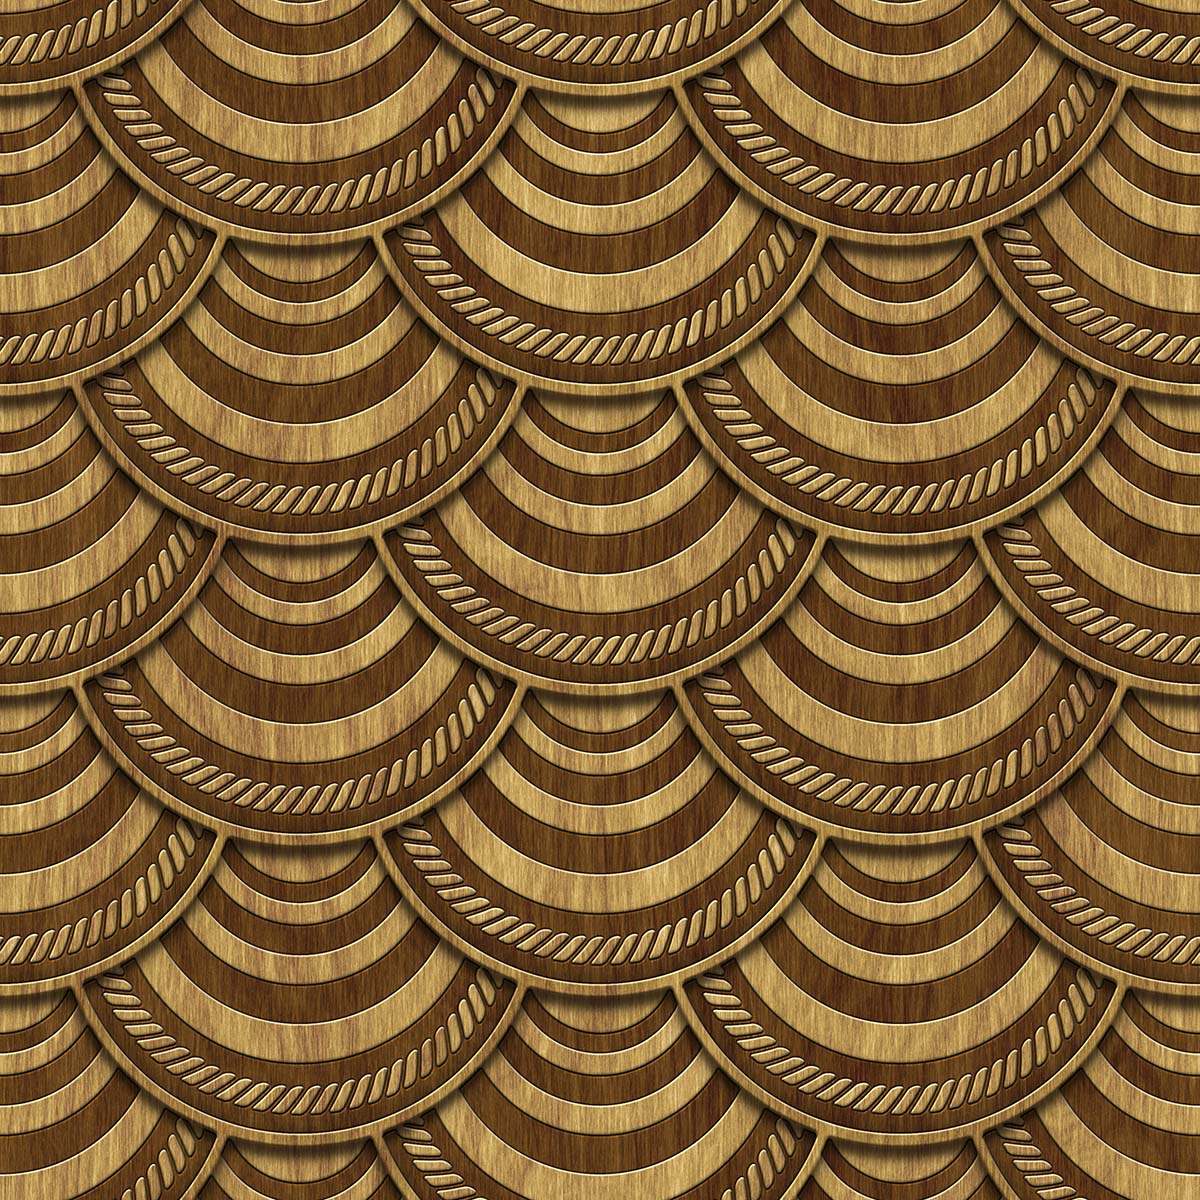 A wood pattern with a circular pattern